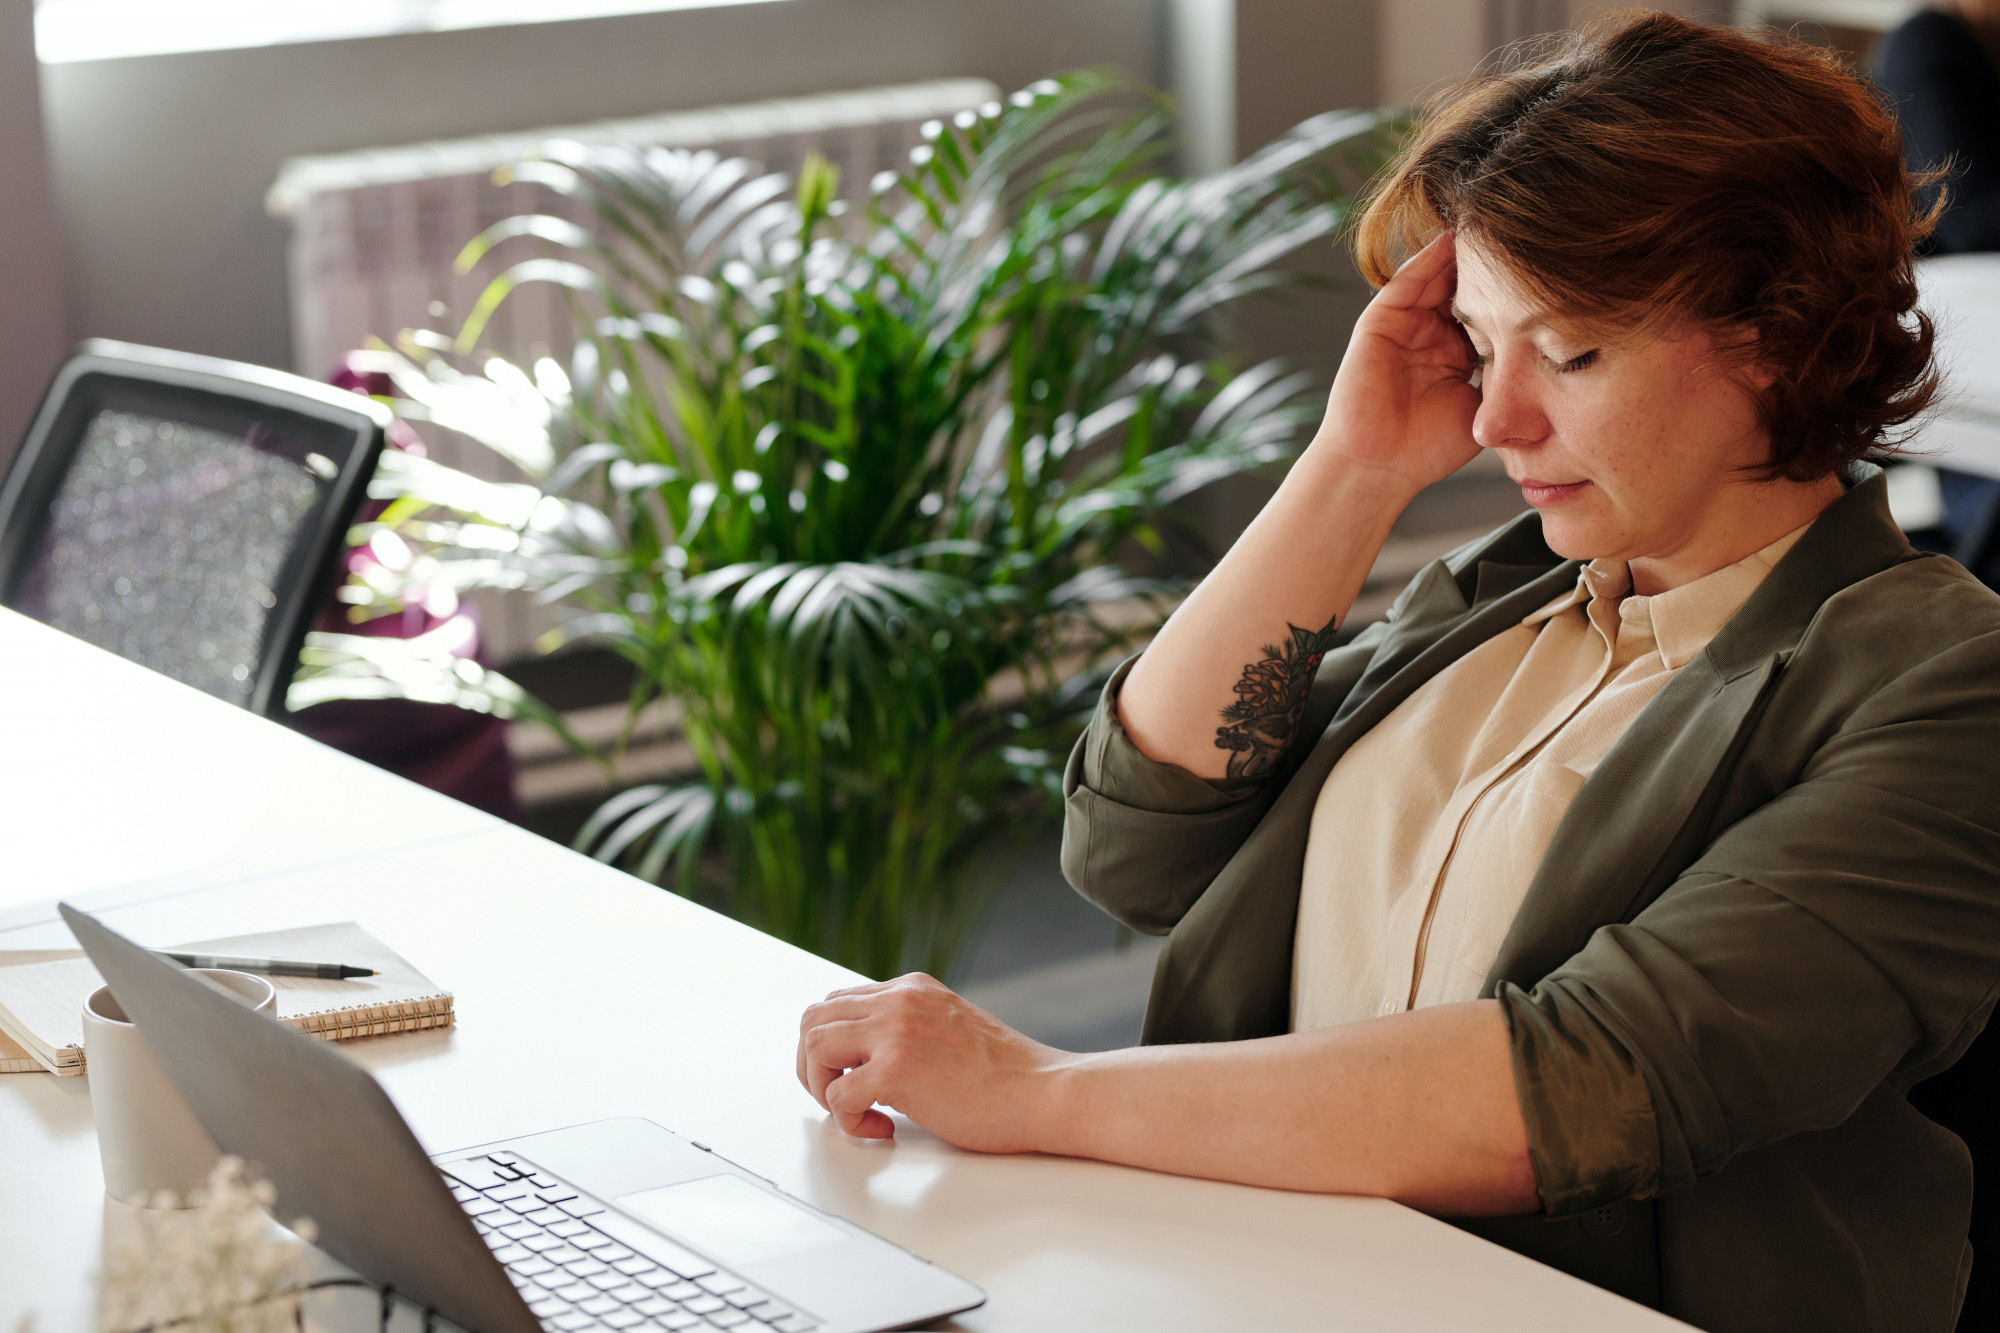 Woman sitting at desk, appearing to have a headache